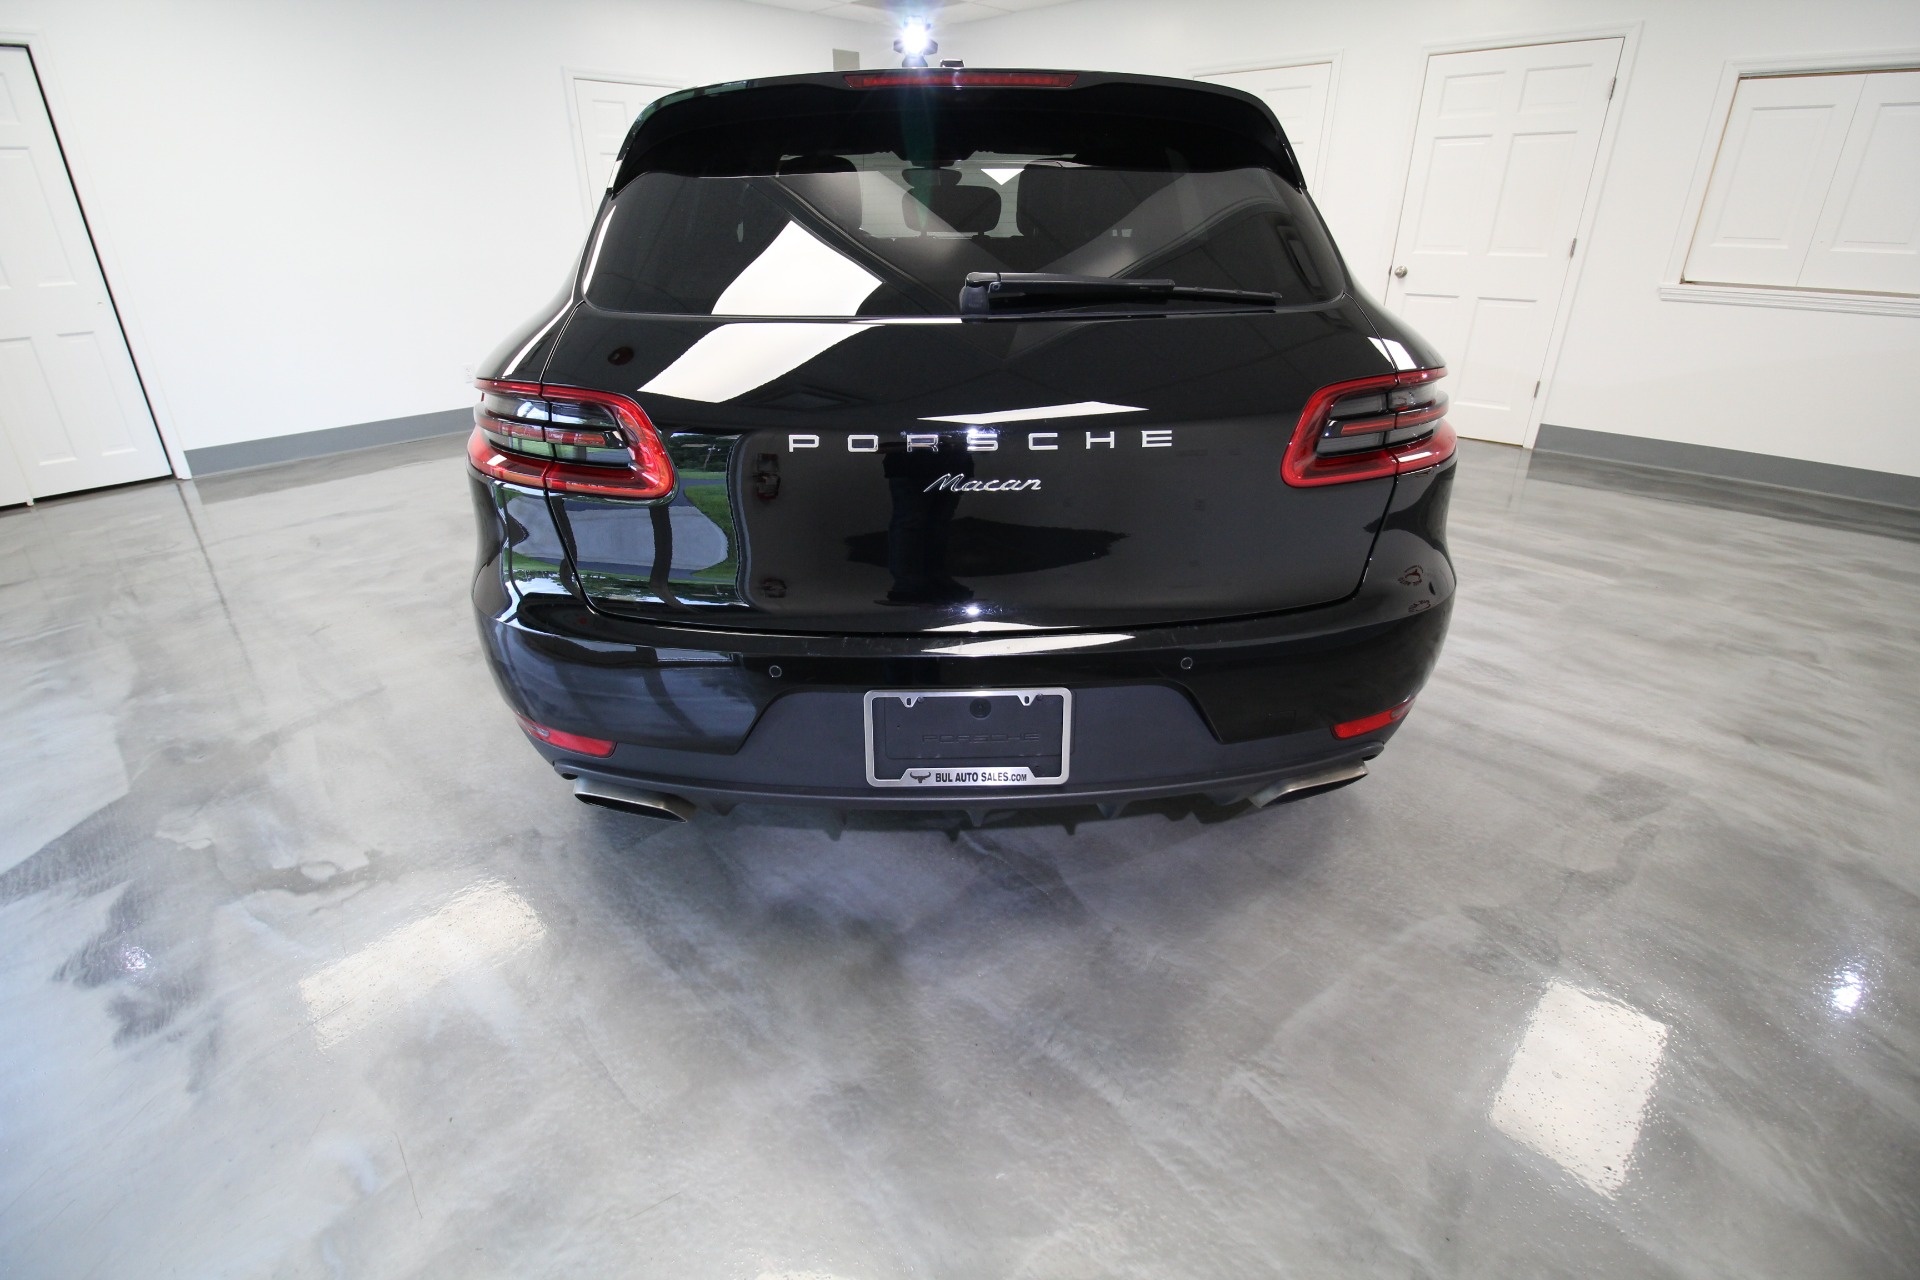 Used 2018 Black Porsche Macan Local Trade Very Clean | Albany, NY